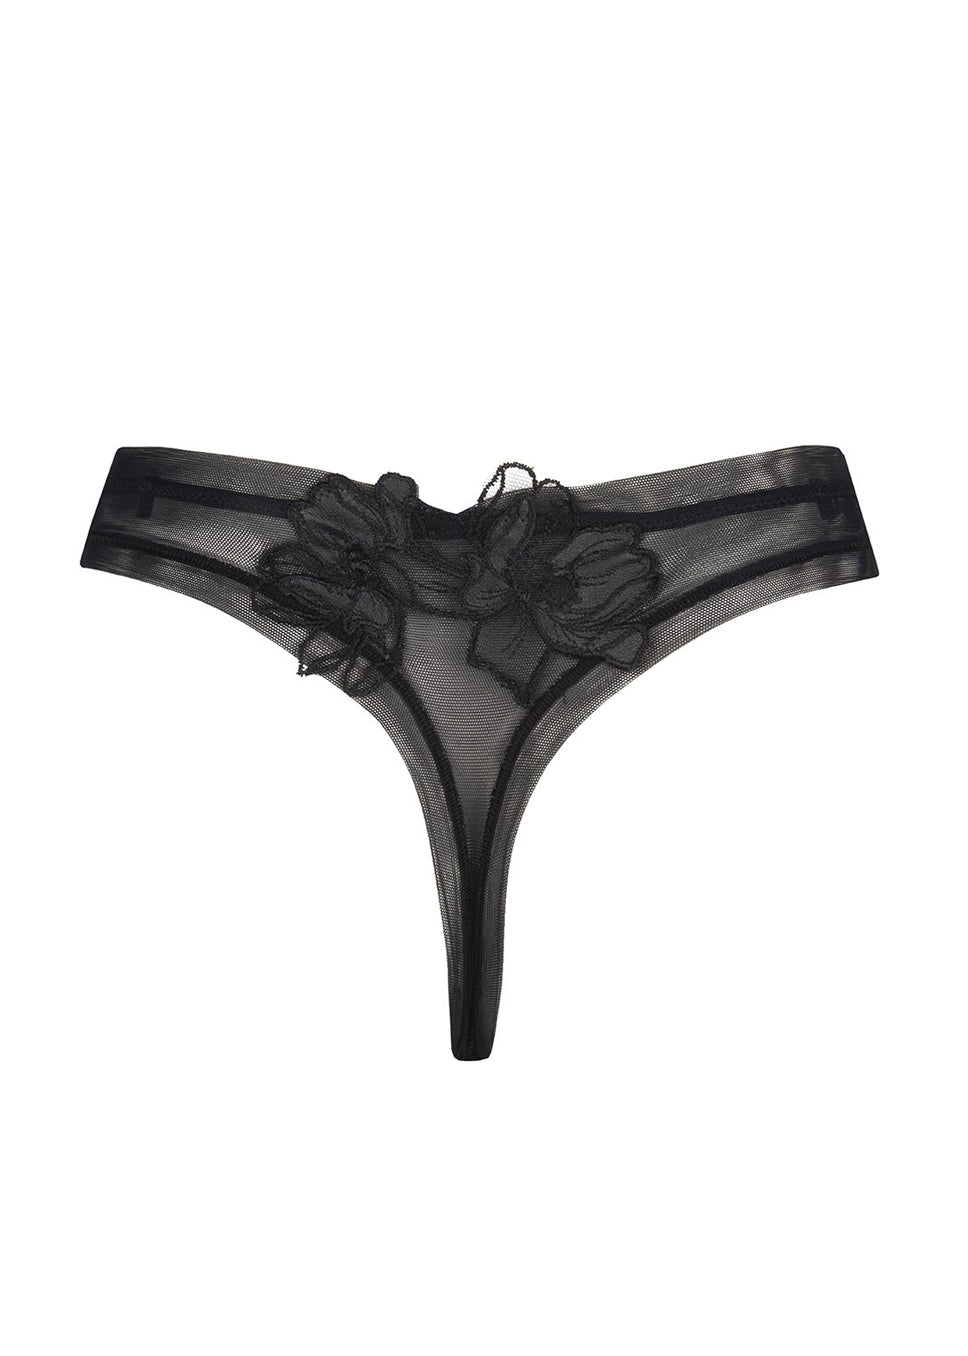 Lise Charmel Glamour Couture Thong - Sugar Cookies Lingerie